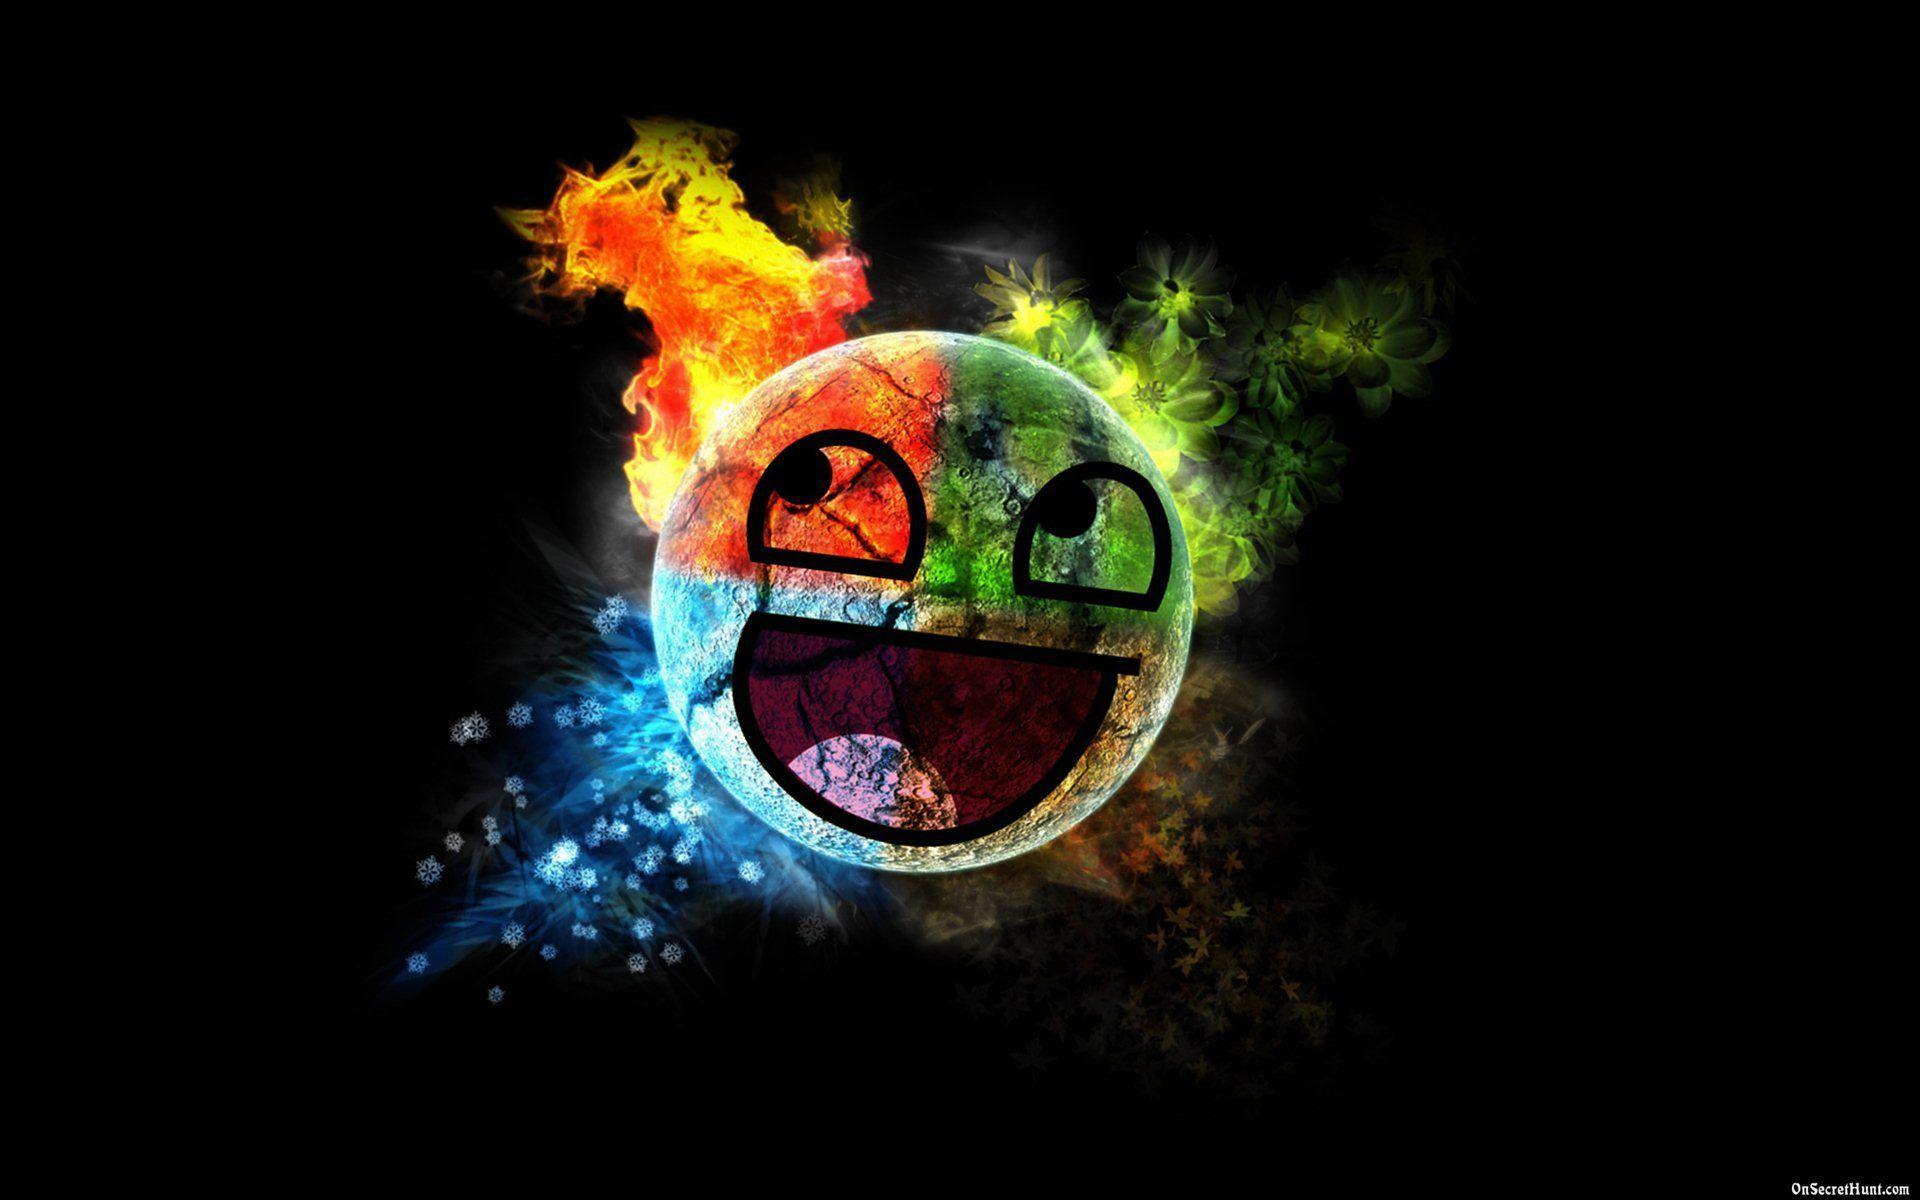 Awesome Smiley Faces Wallpaper. Best Free Wallpaper